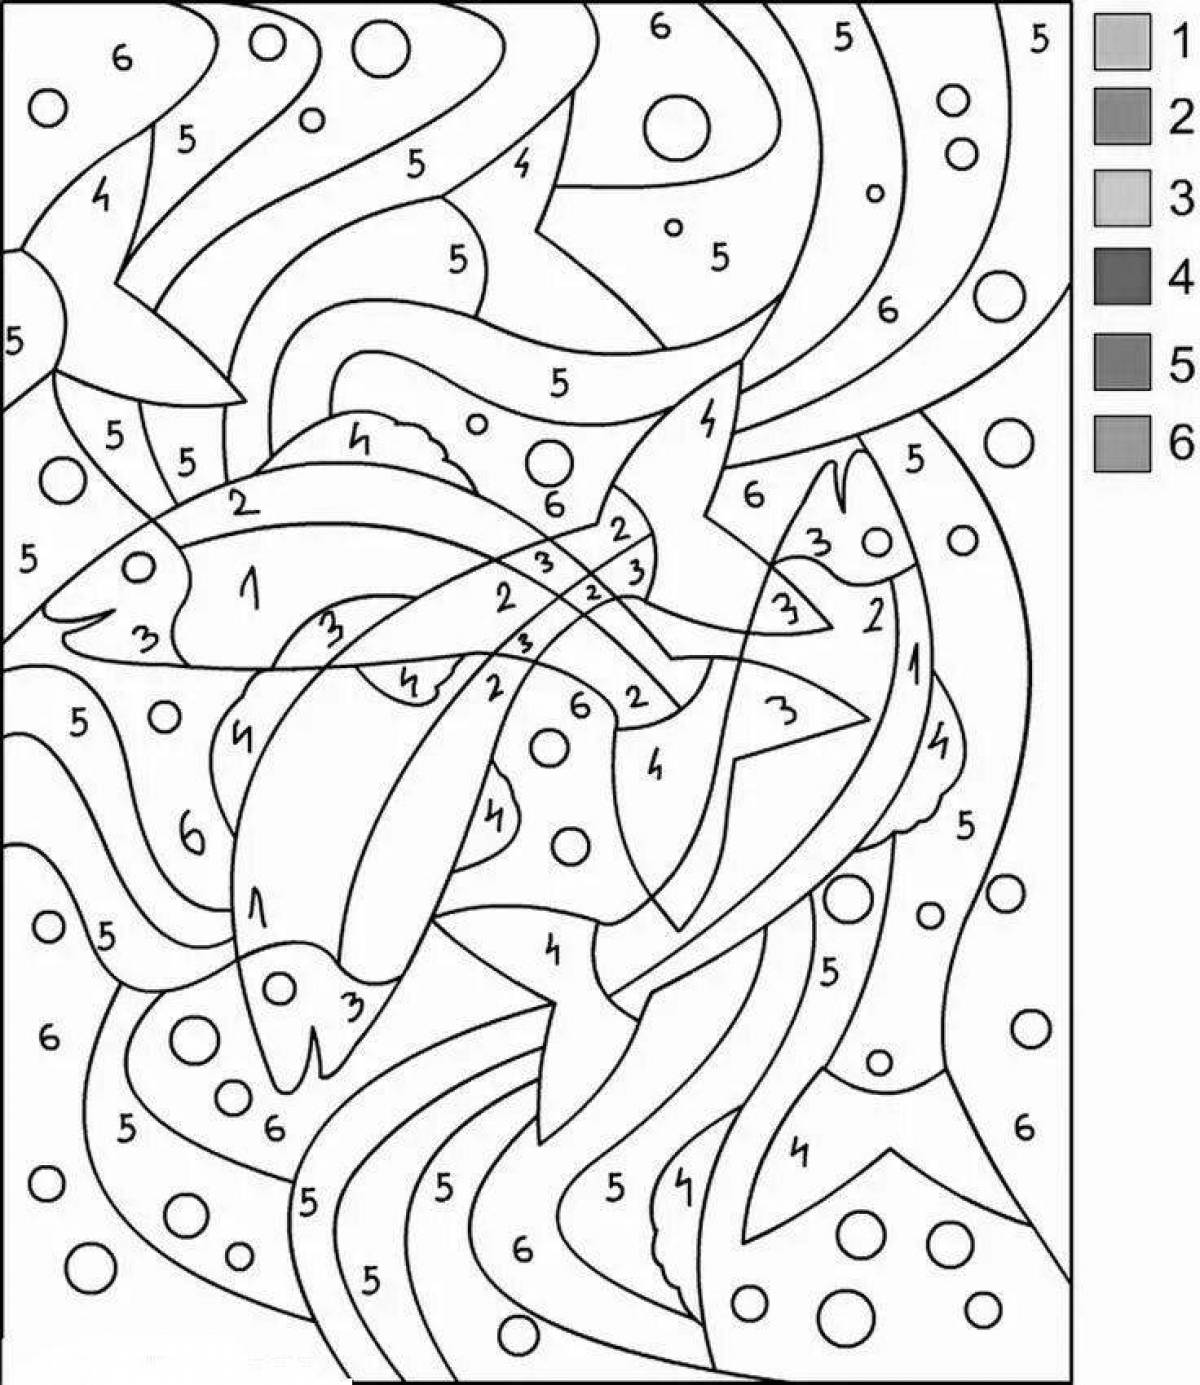 Joyful coloring by mod numbers